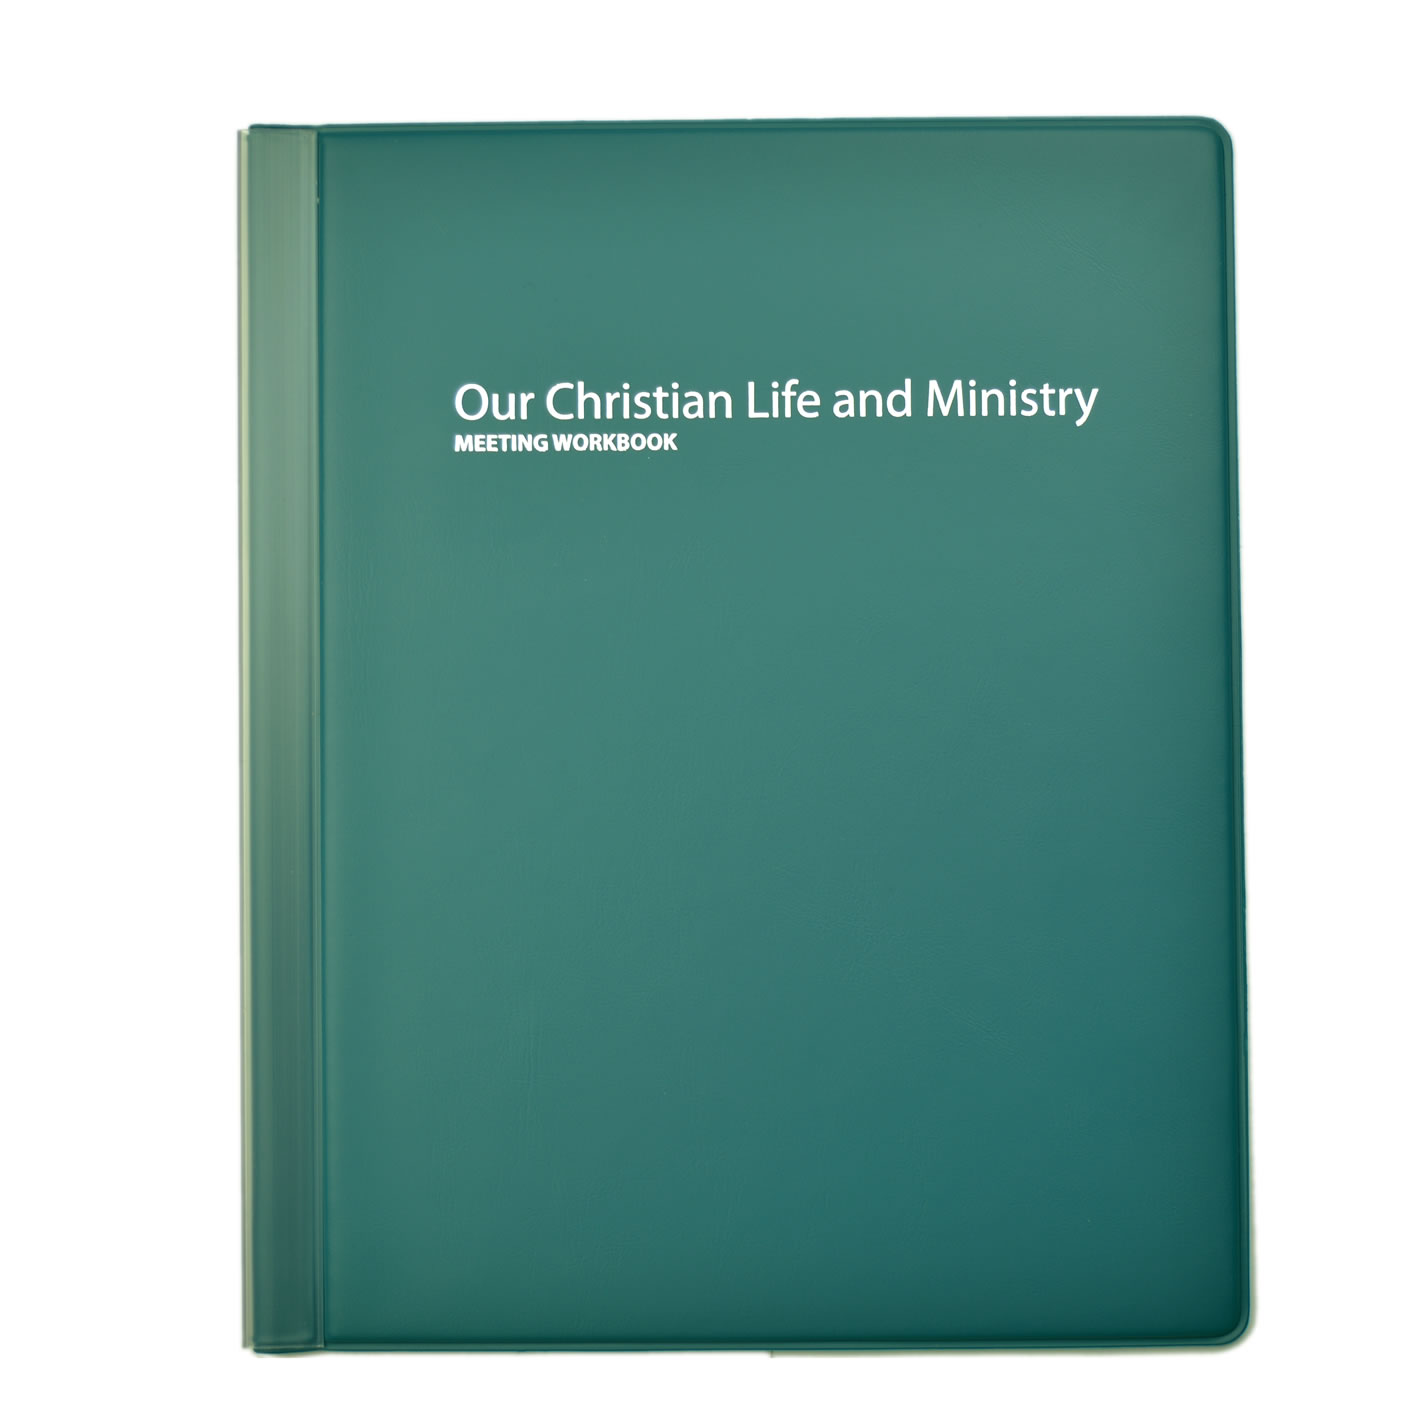 NEW - Our Christian Life and Ministry Meeting Workbook Folder - LAGOON  - LAGOON